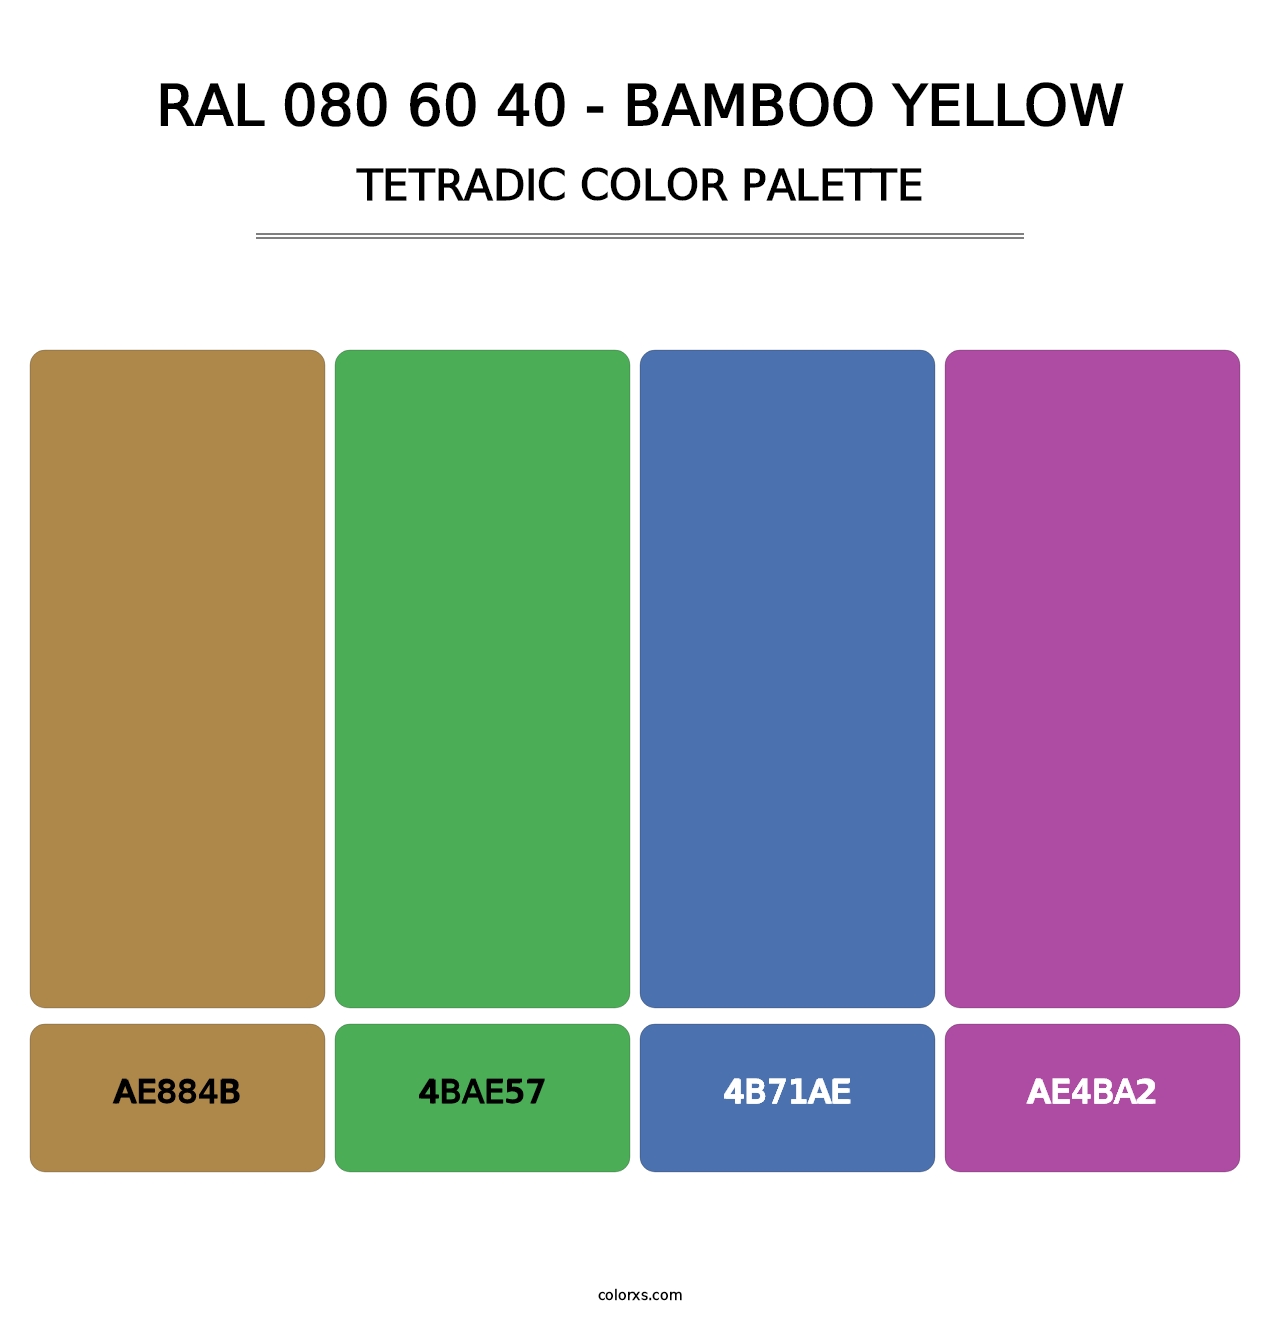 RAL 080 60 40 - Bamboo Yellow - Tetradic Color Palette